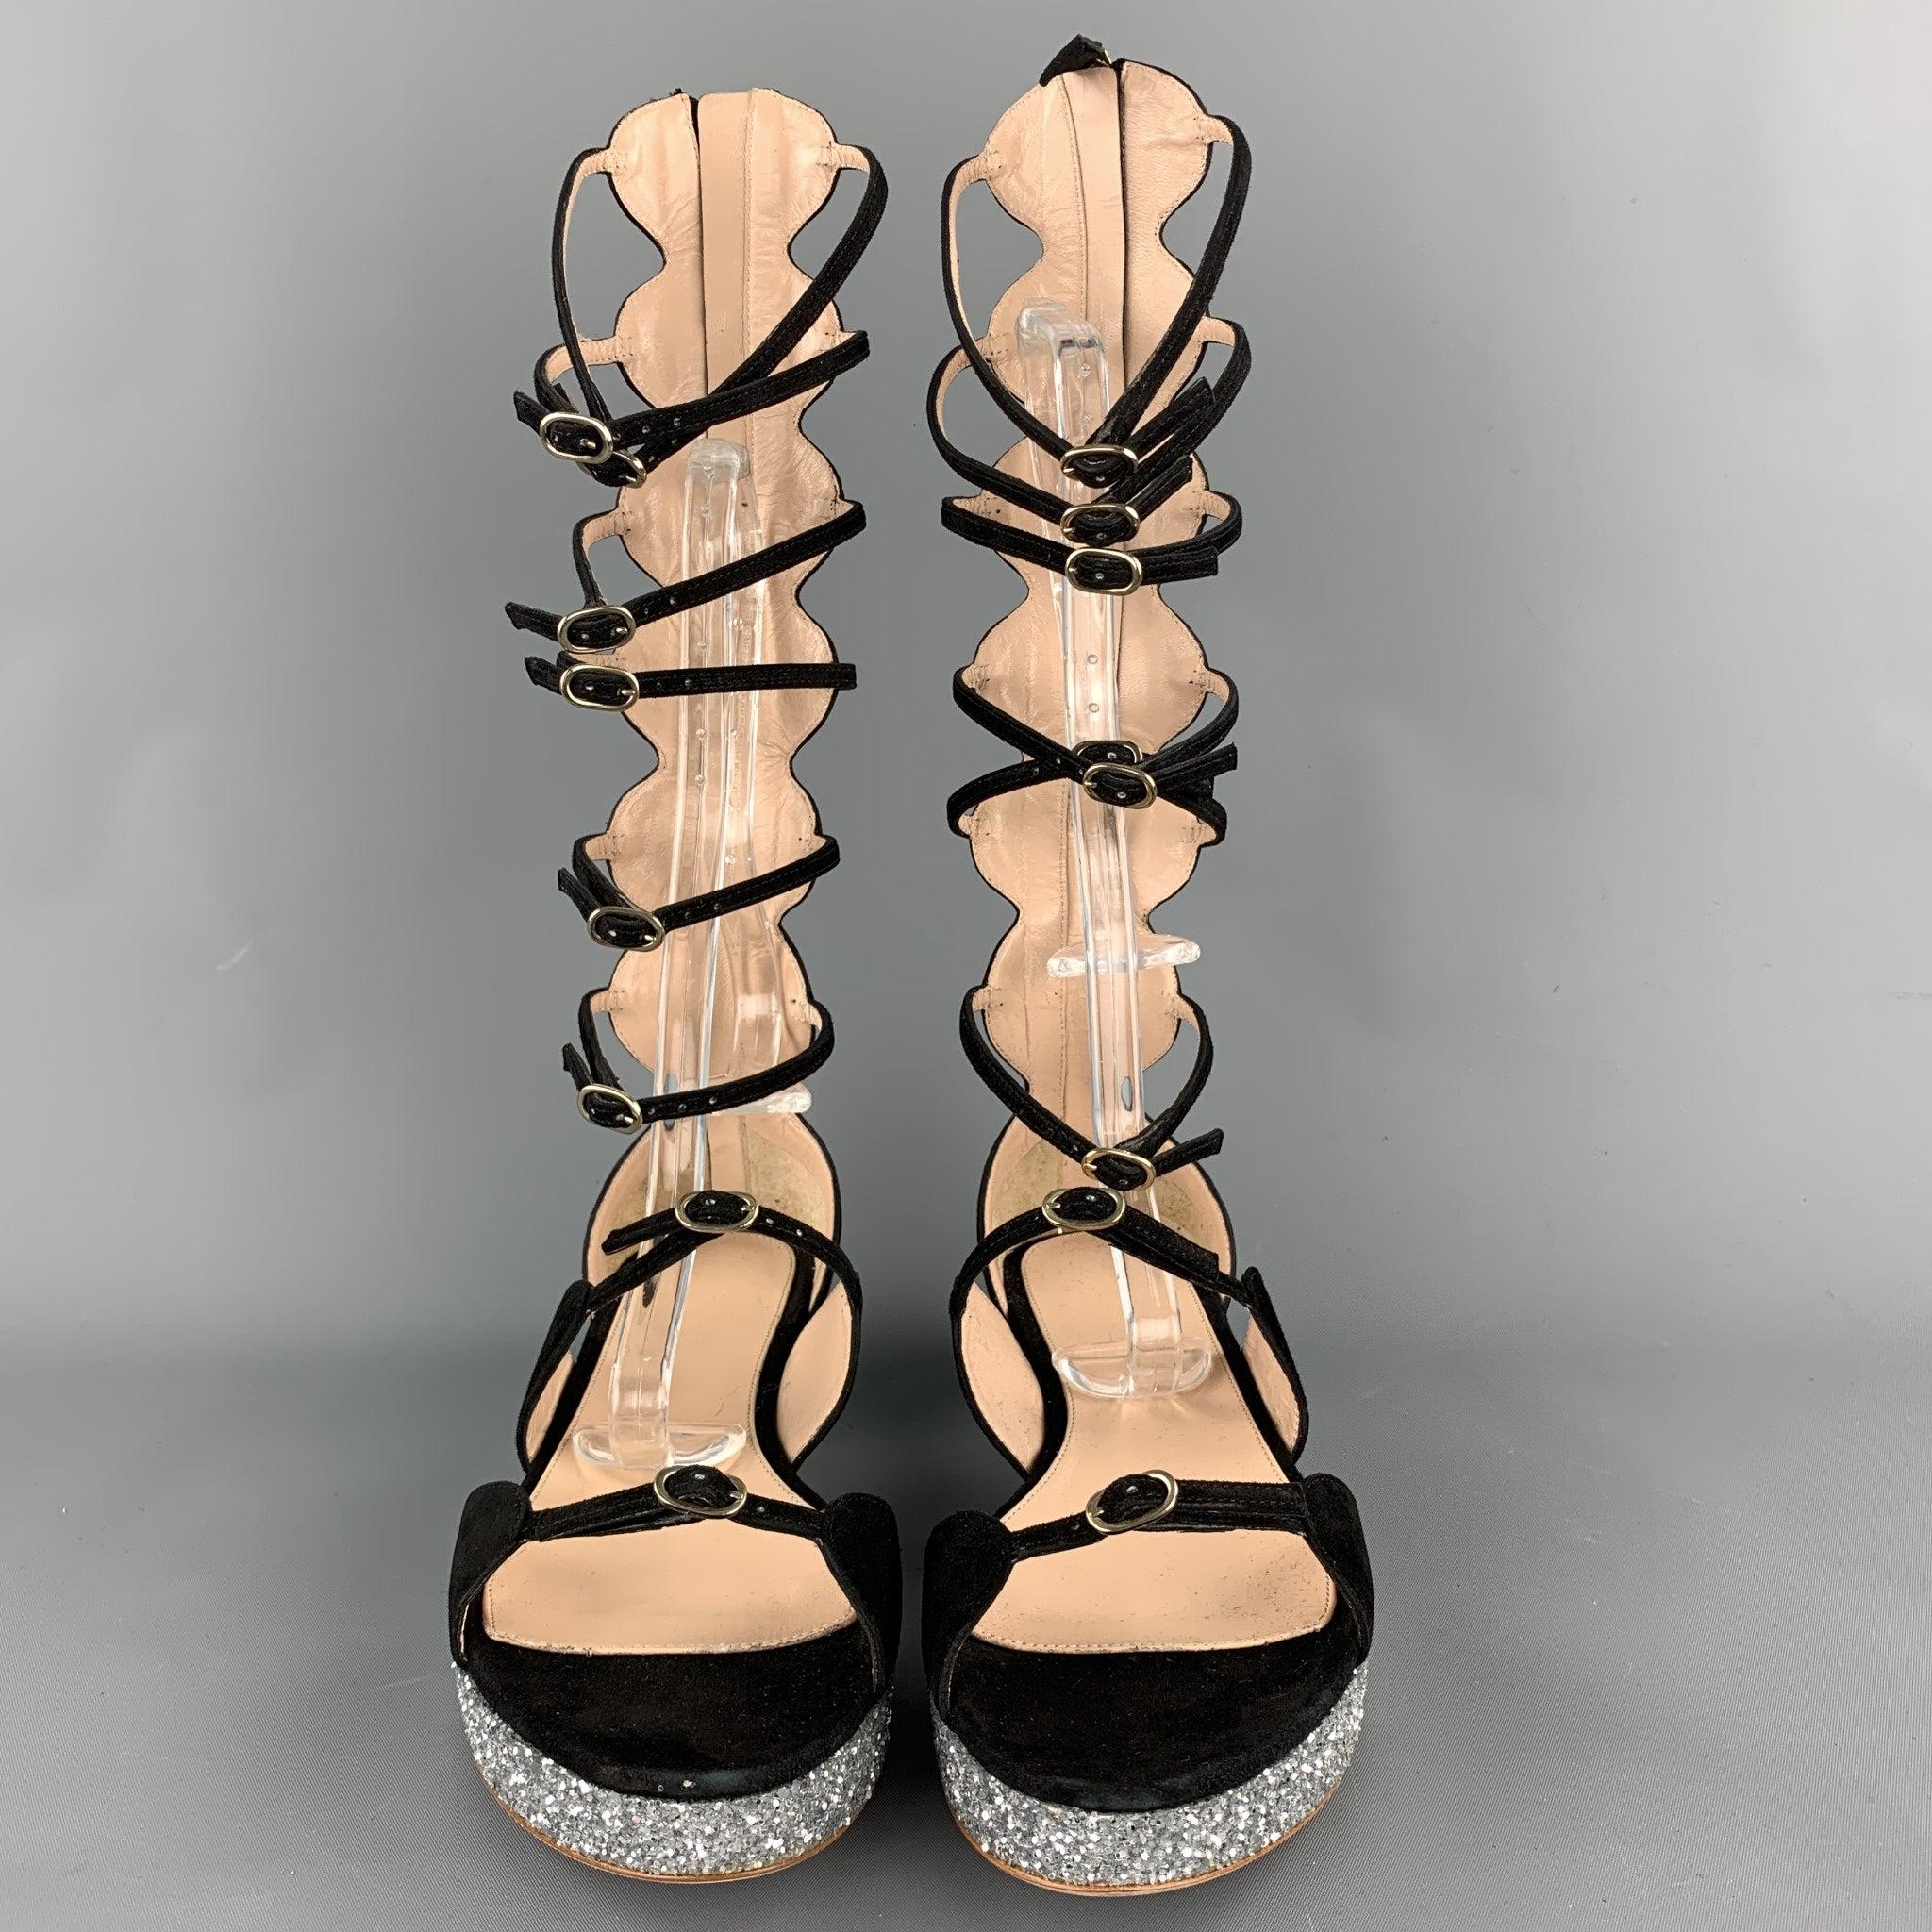 GIAMBATTISTA VALLI sandals comes in a black suede with a glitter platform detail featuring a gladiator style and a back zip up closure. Comes with box. Made in Italy.Very Good
Pre-Owned Condition. 

Marked:   IT 38 

Measurements: 
  Length: 9.5